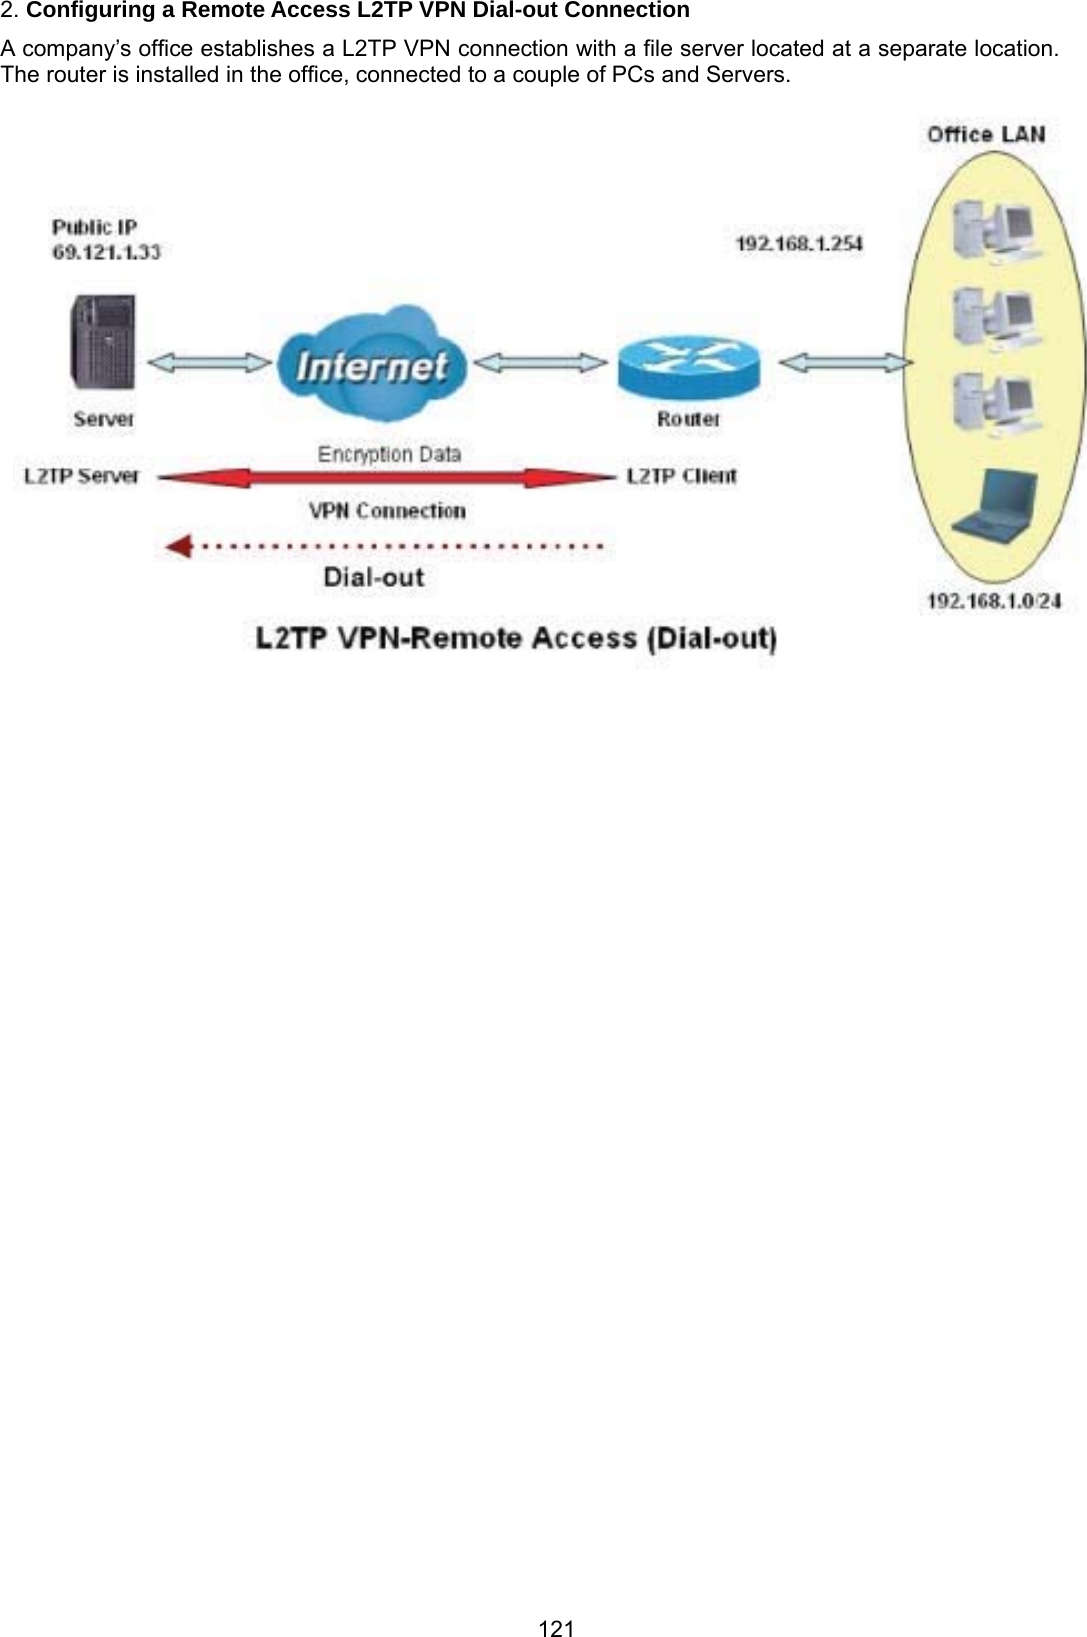 121 2. Configuring a Remote Access L2TP VPN Dial-out Connection A company’s office establishes a L2TP VPN connection with a file server located at a separate location. The router is installed in the office, connected to a couple of PCs and Servers.  